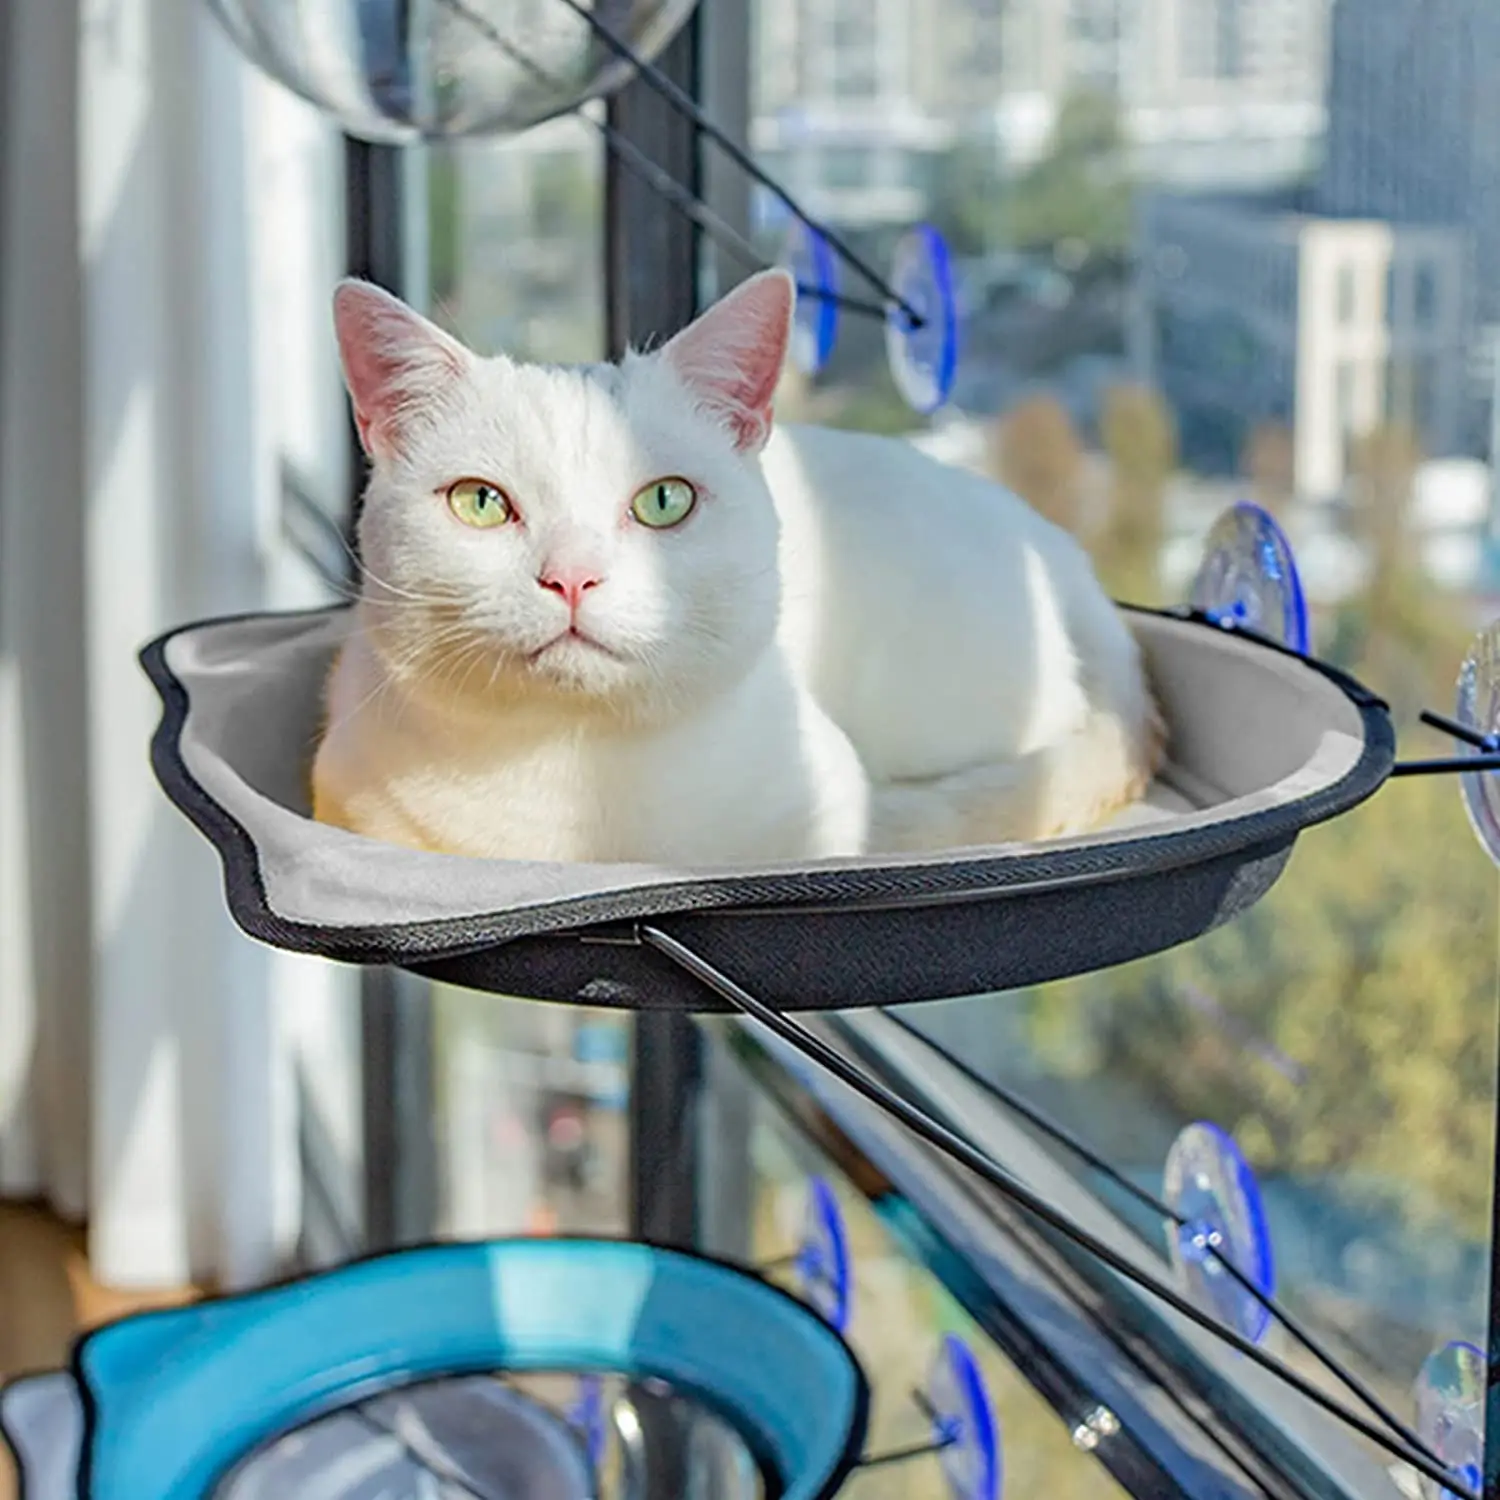 

Cat Bed Window Mounted Cat Hammock Bed Pet Seat Super Suction Cup Hanging Lounger Soft Warm Bed For Cats Small Dogs Rabbits